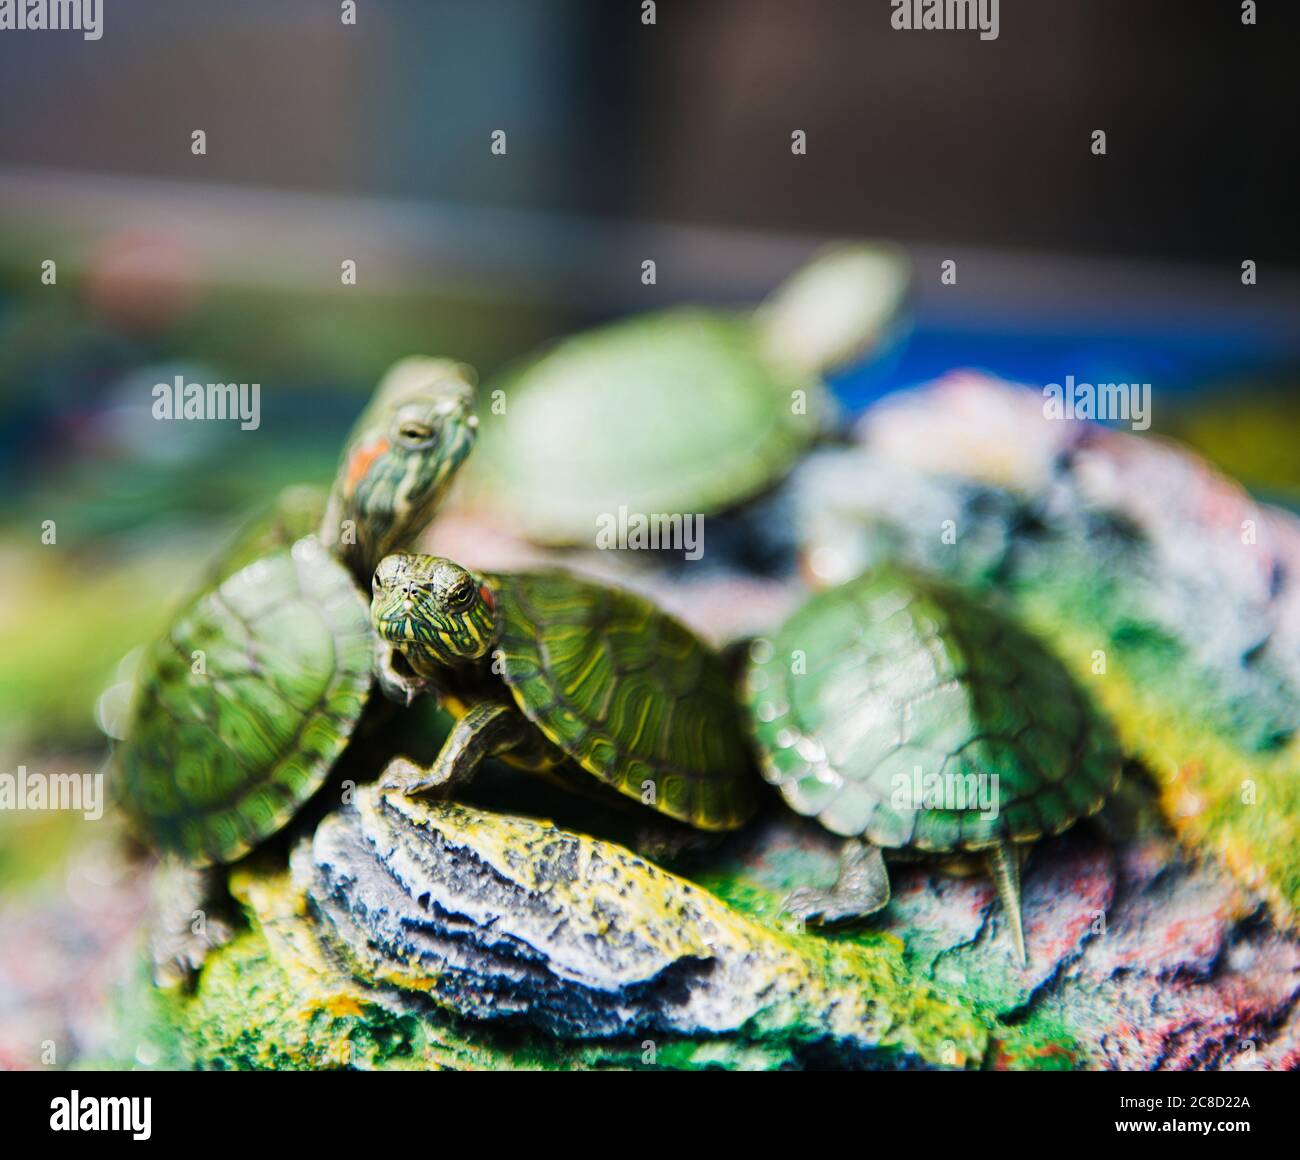 Baby turtles for sale at a pet shop Stock Photo